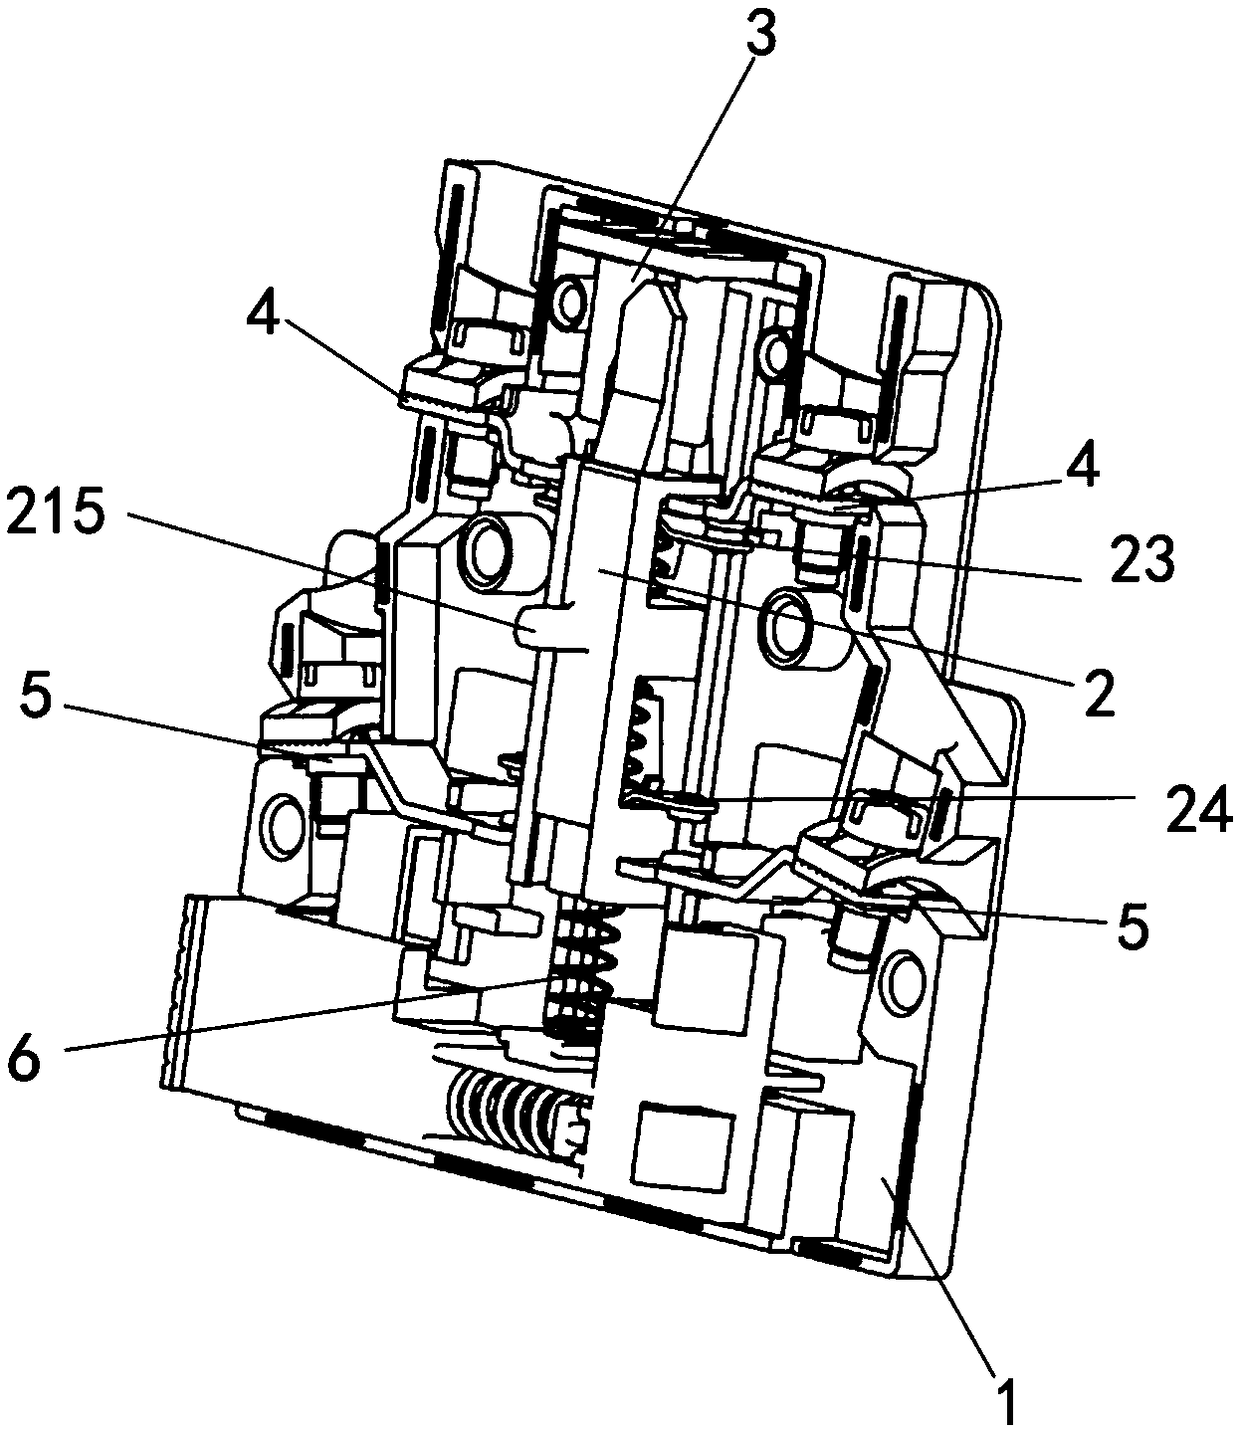 Auxiliary contact with indication function, and contactor